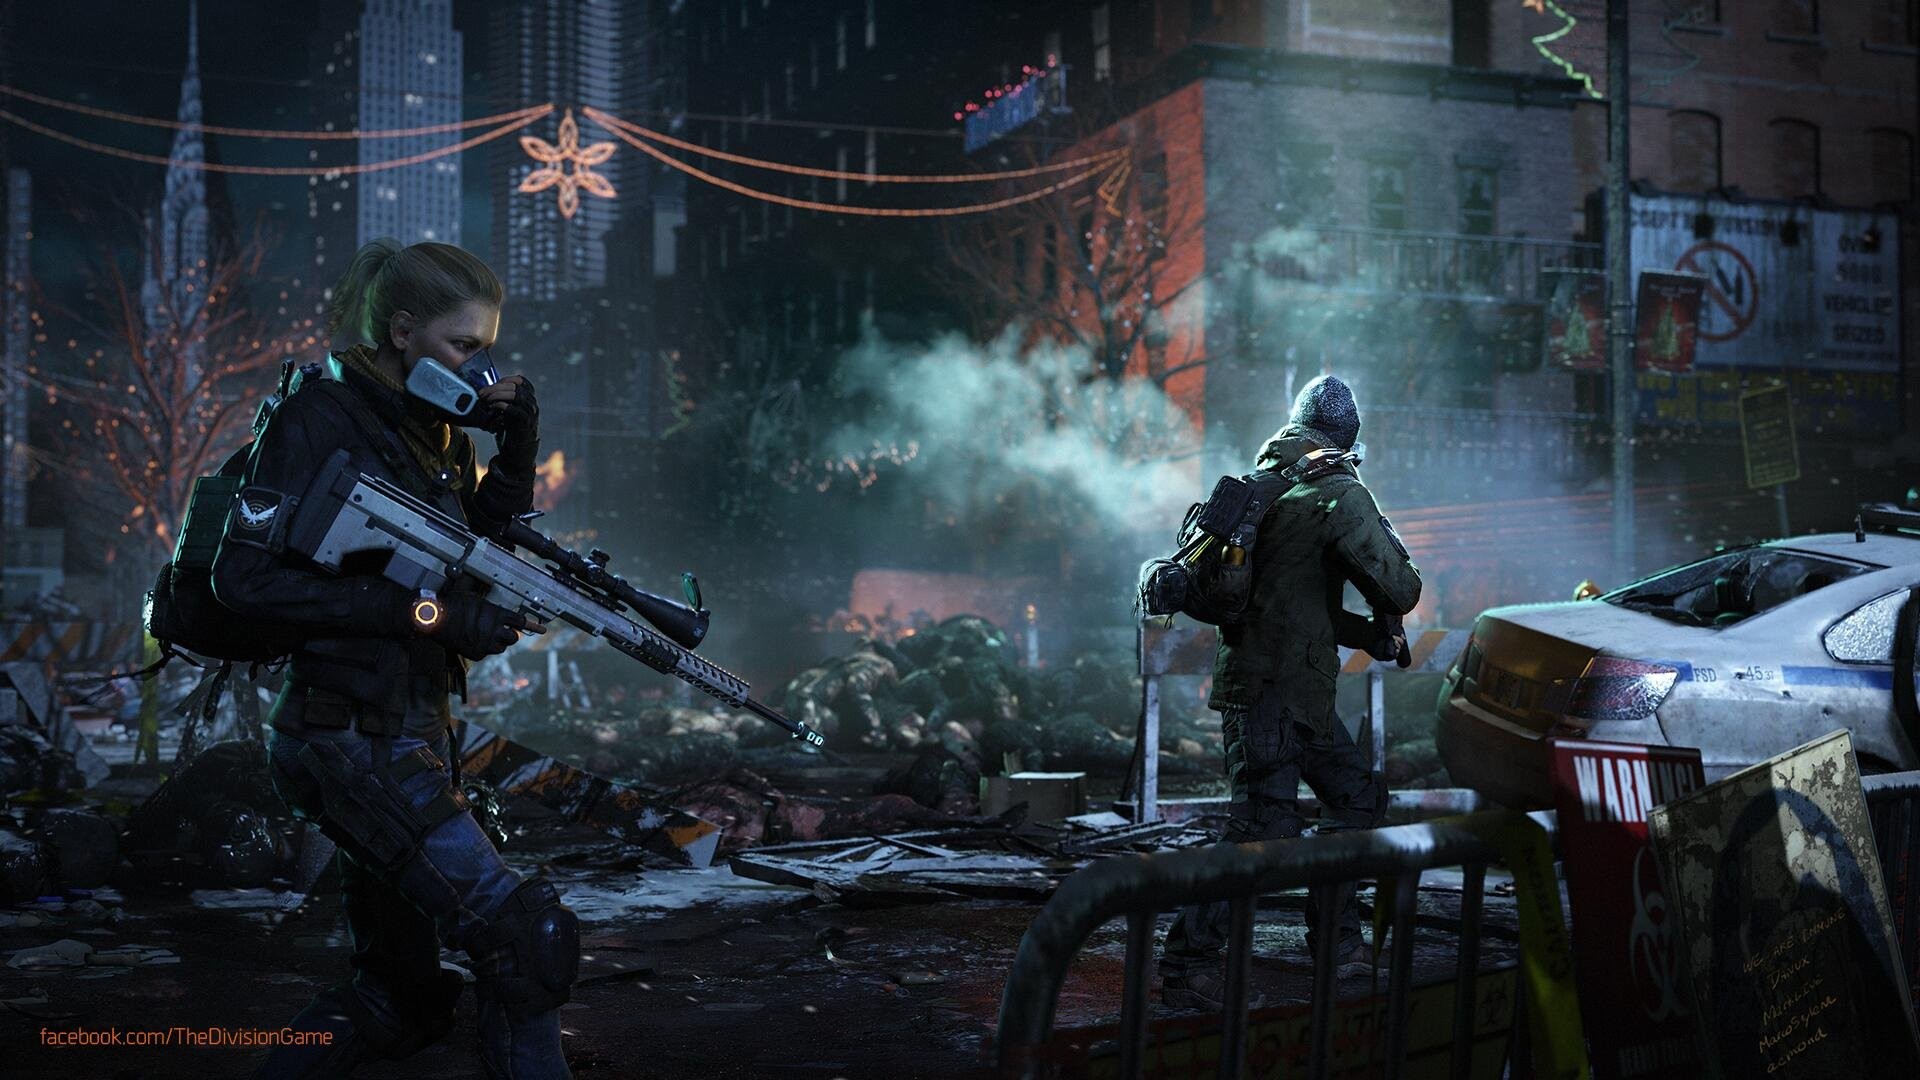 1920x1080 ... the division wallpaper mydivision net; division female characters  wallpaper walldevil ...